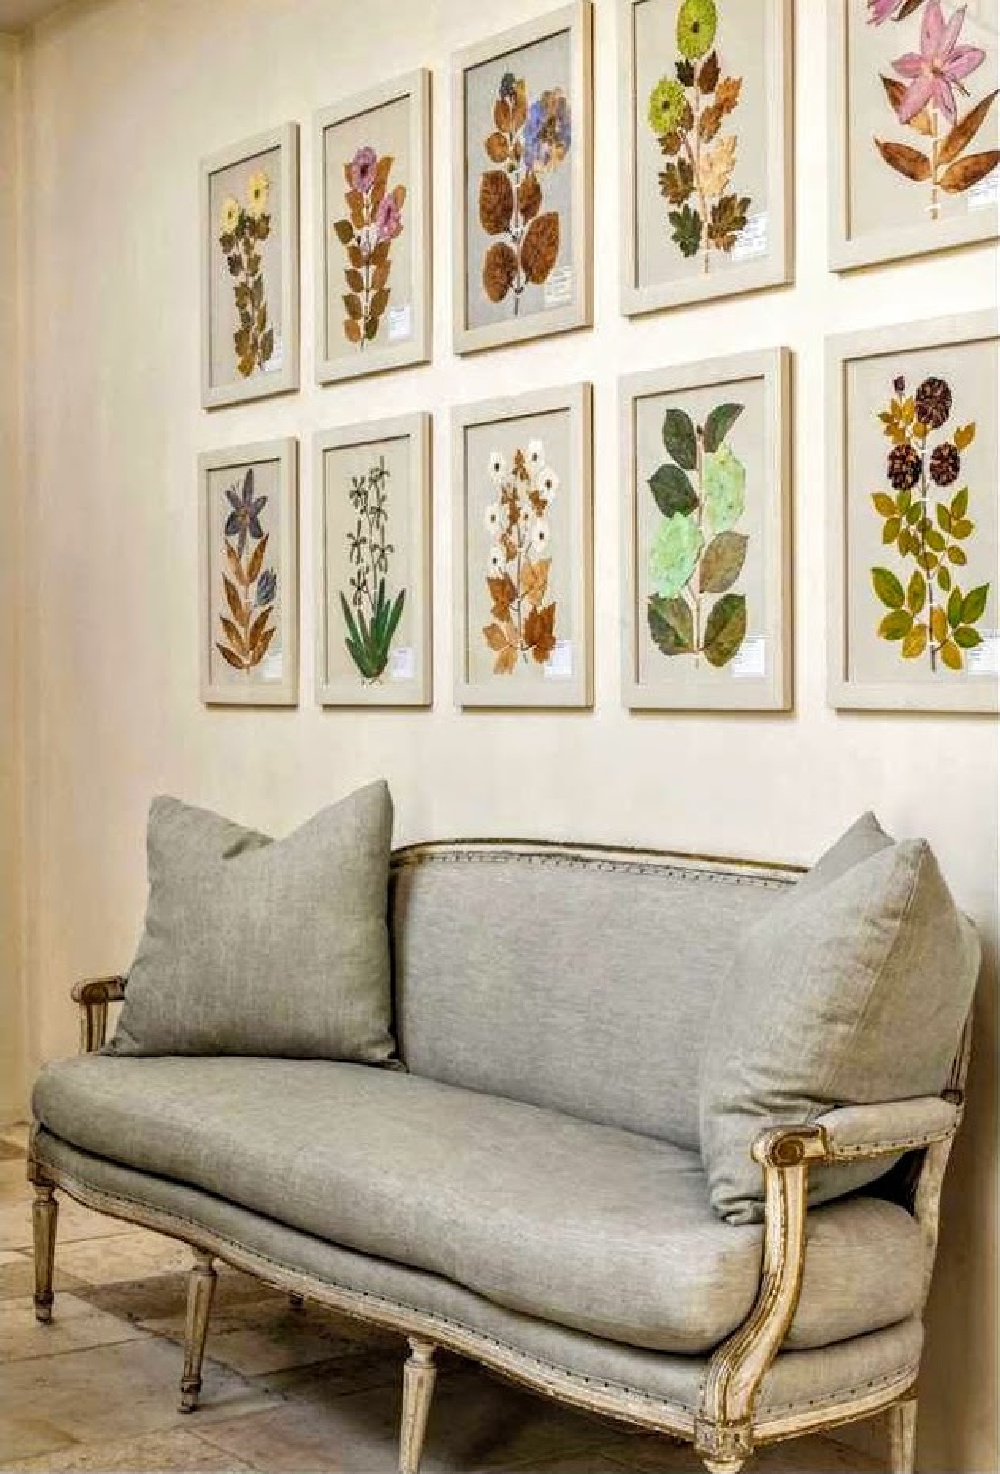 Vividly colorful framed botanicals hung above a French settee in an elegant home in Houston with interiors designed by Pamela Pierce.